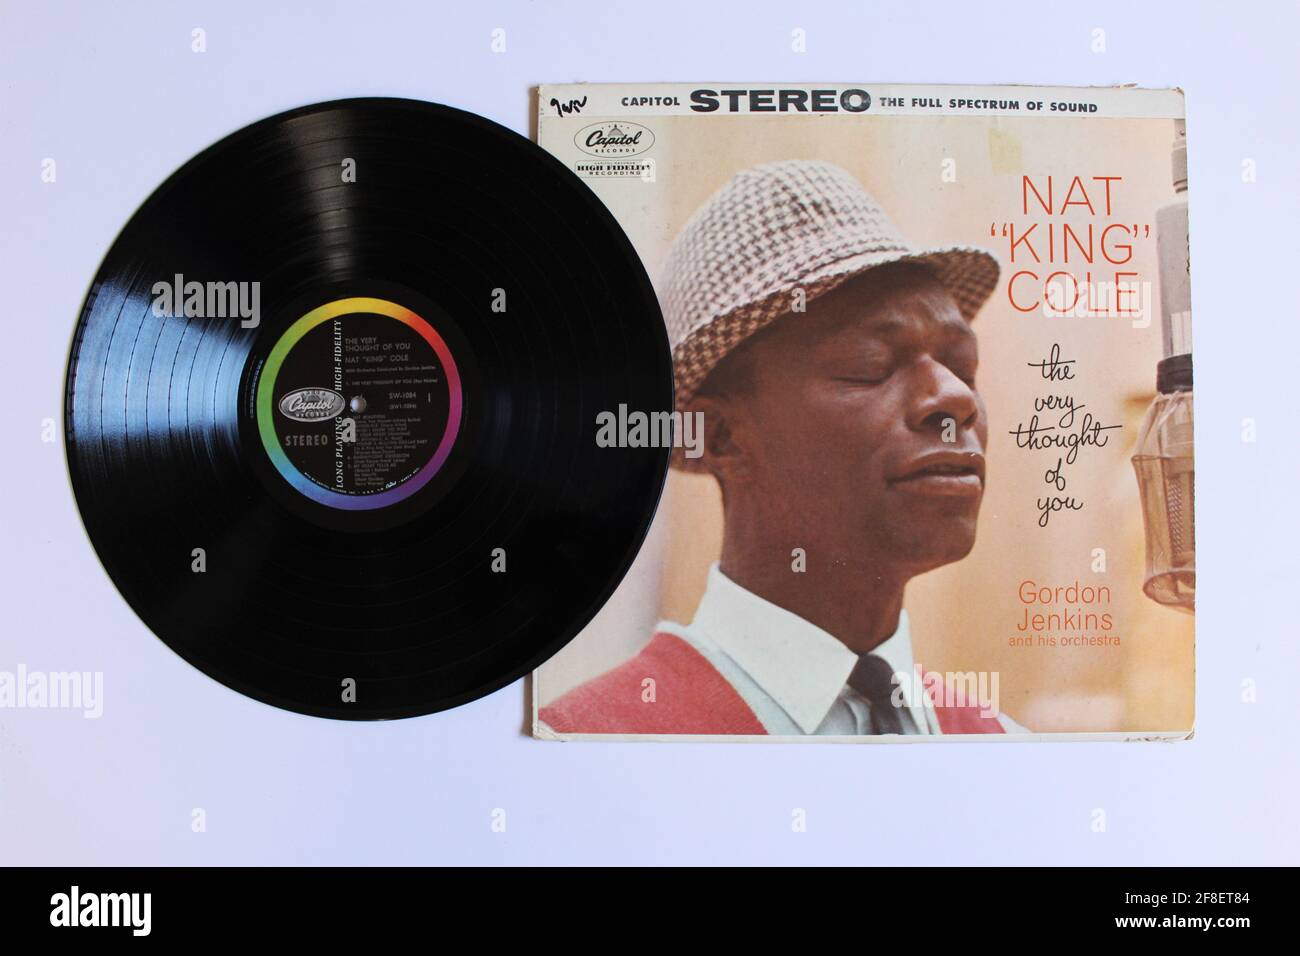 Traditional pop, rnb and jazz artist, Nat King Cole music album on vinyl record LP disc. Titled: The Very Thought of You Stock Photo